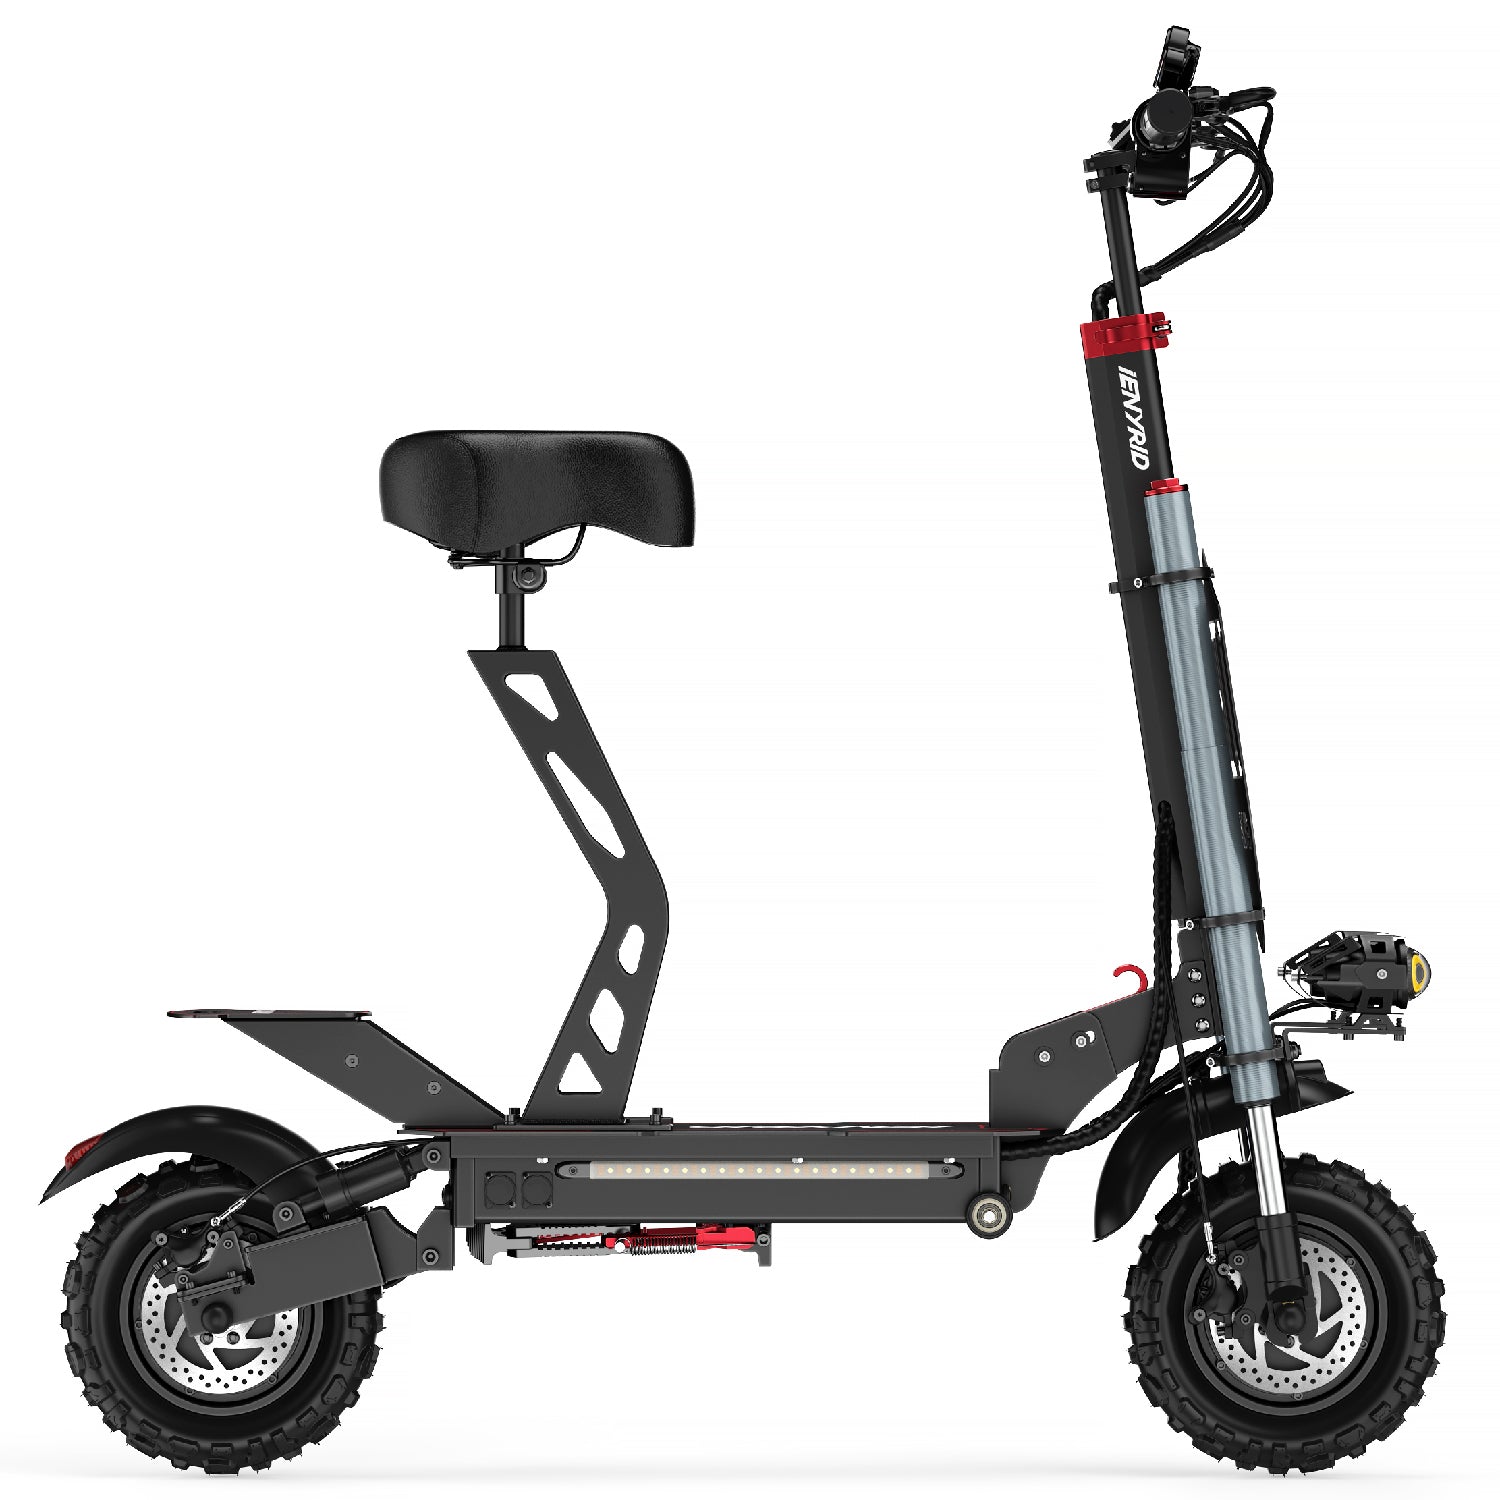 IENYRID ES20 1200W x 2 Dual Motor 11 Inch Off-road Electric Scooter 20Ah Battery